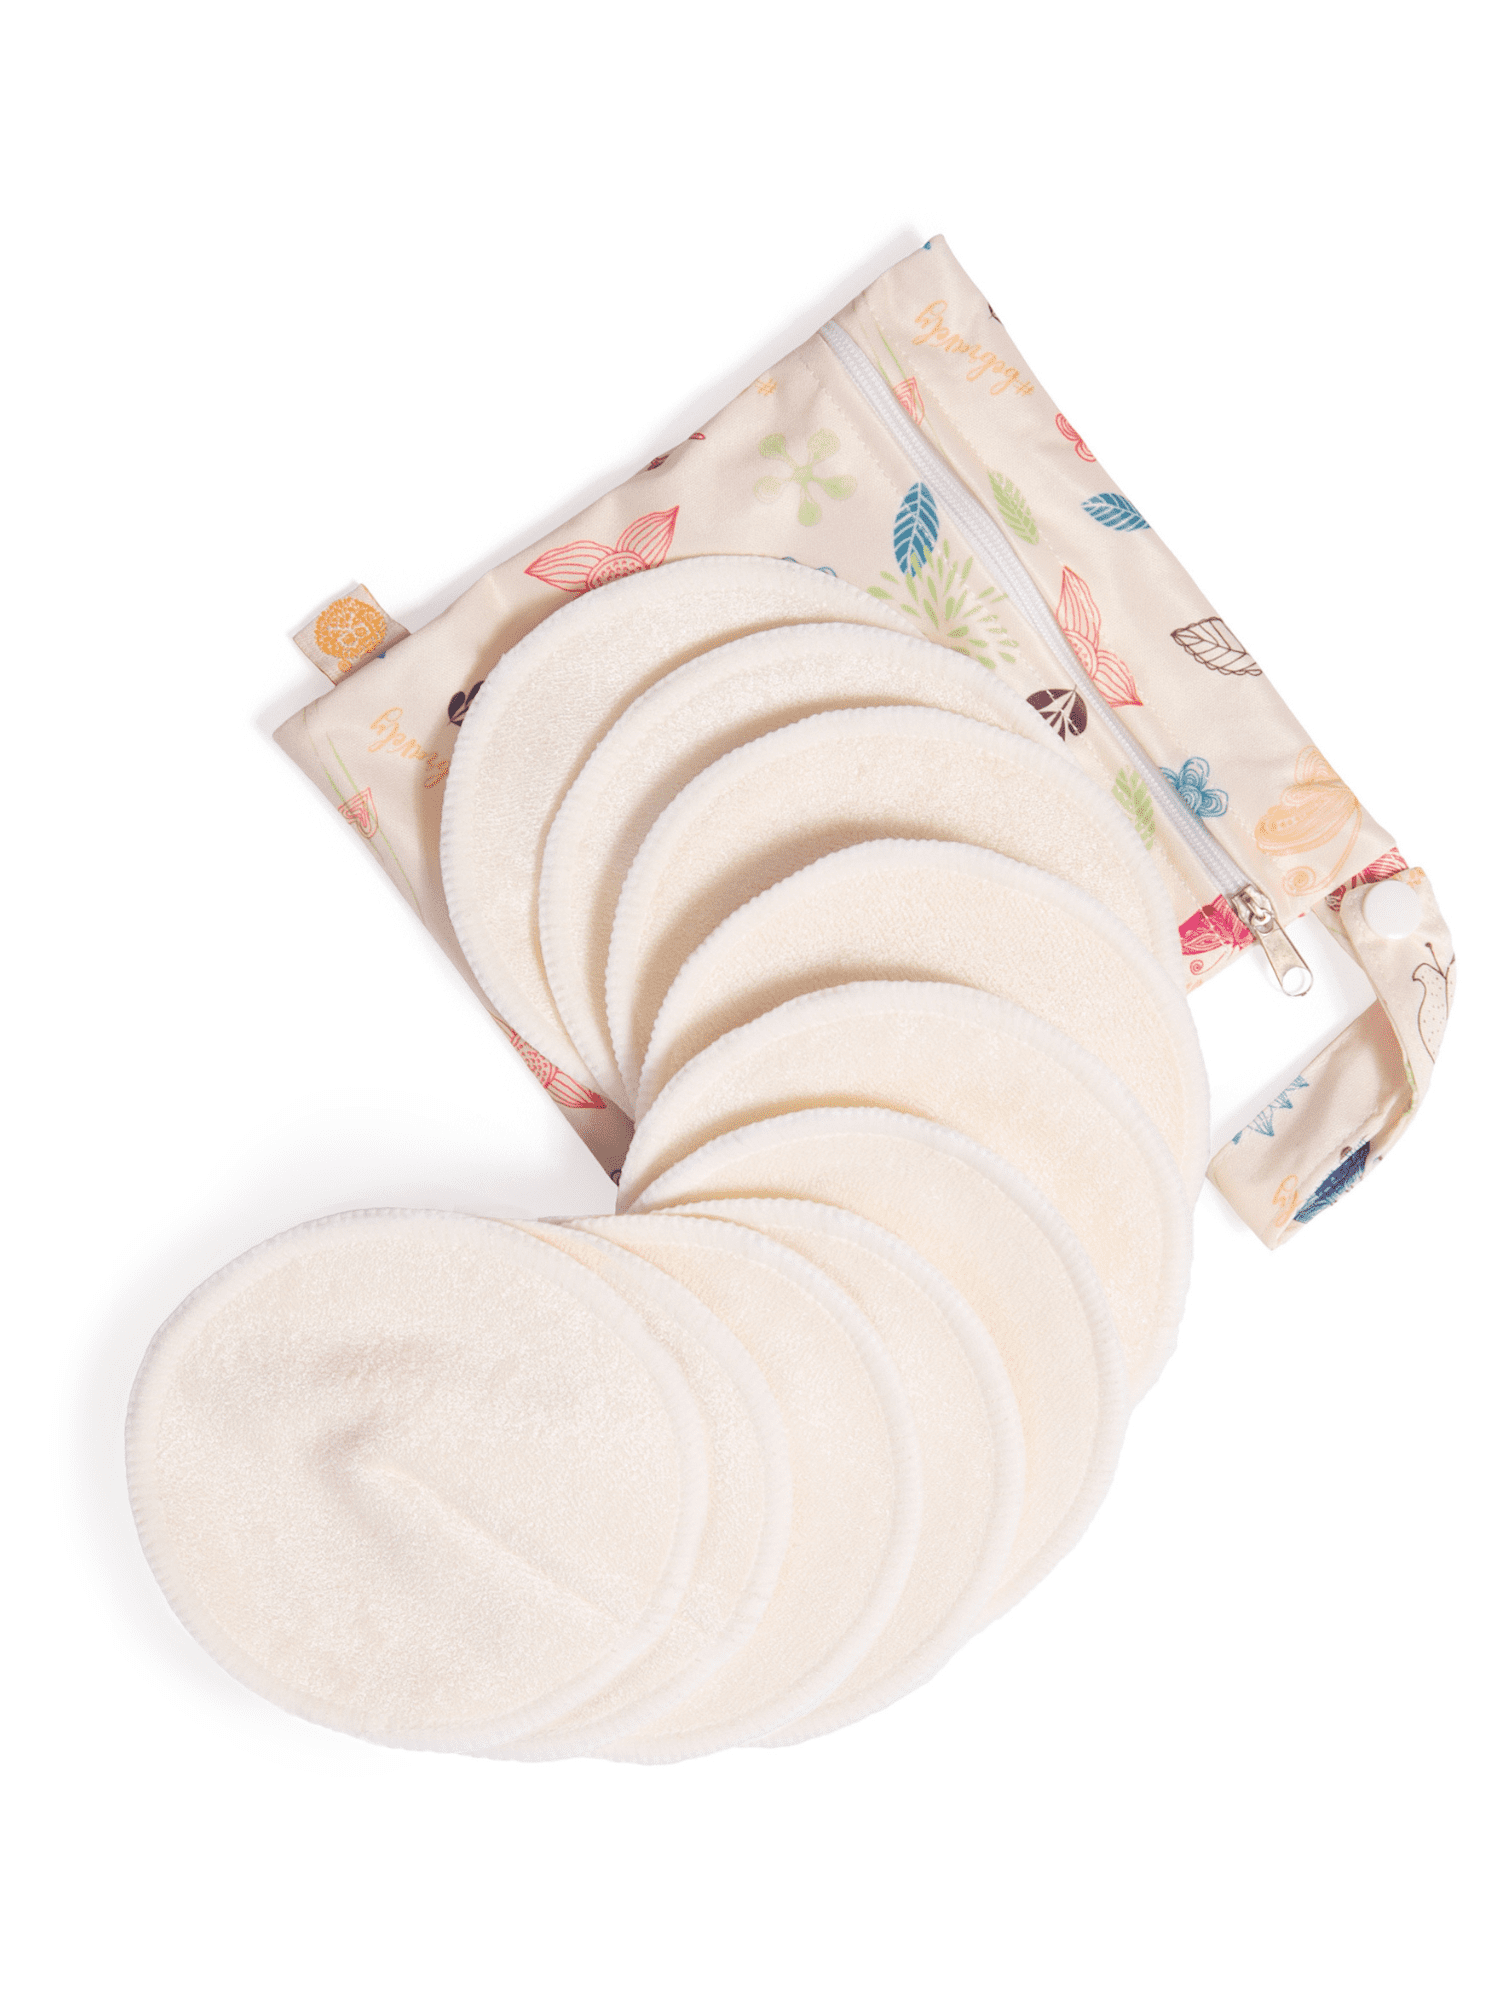 Kindred Bravely Organic Reusable Nursing Pads 10 Pack  Washable Breast  Pads for Breastfeeding with Carry Bag 